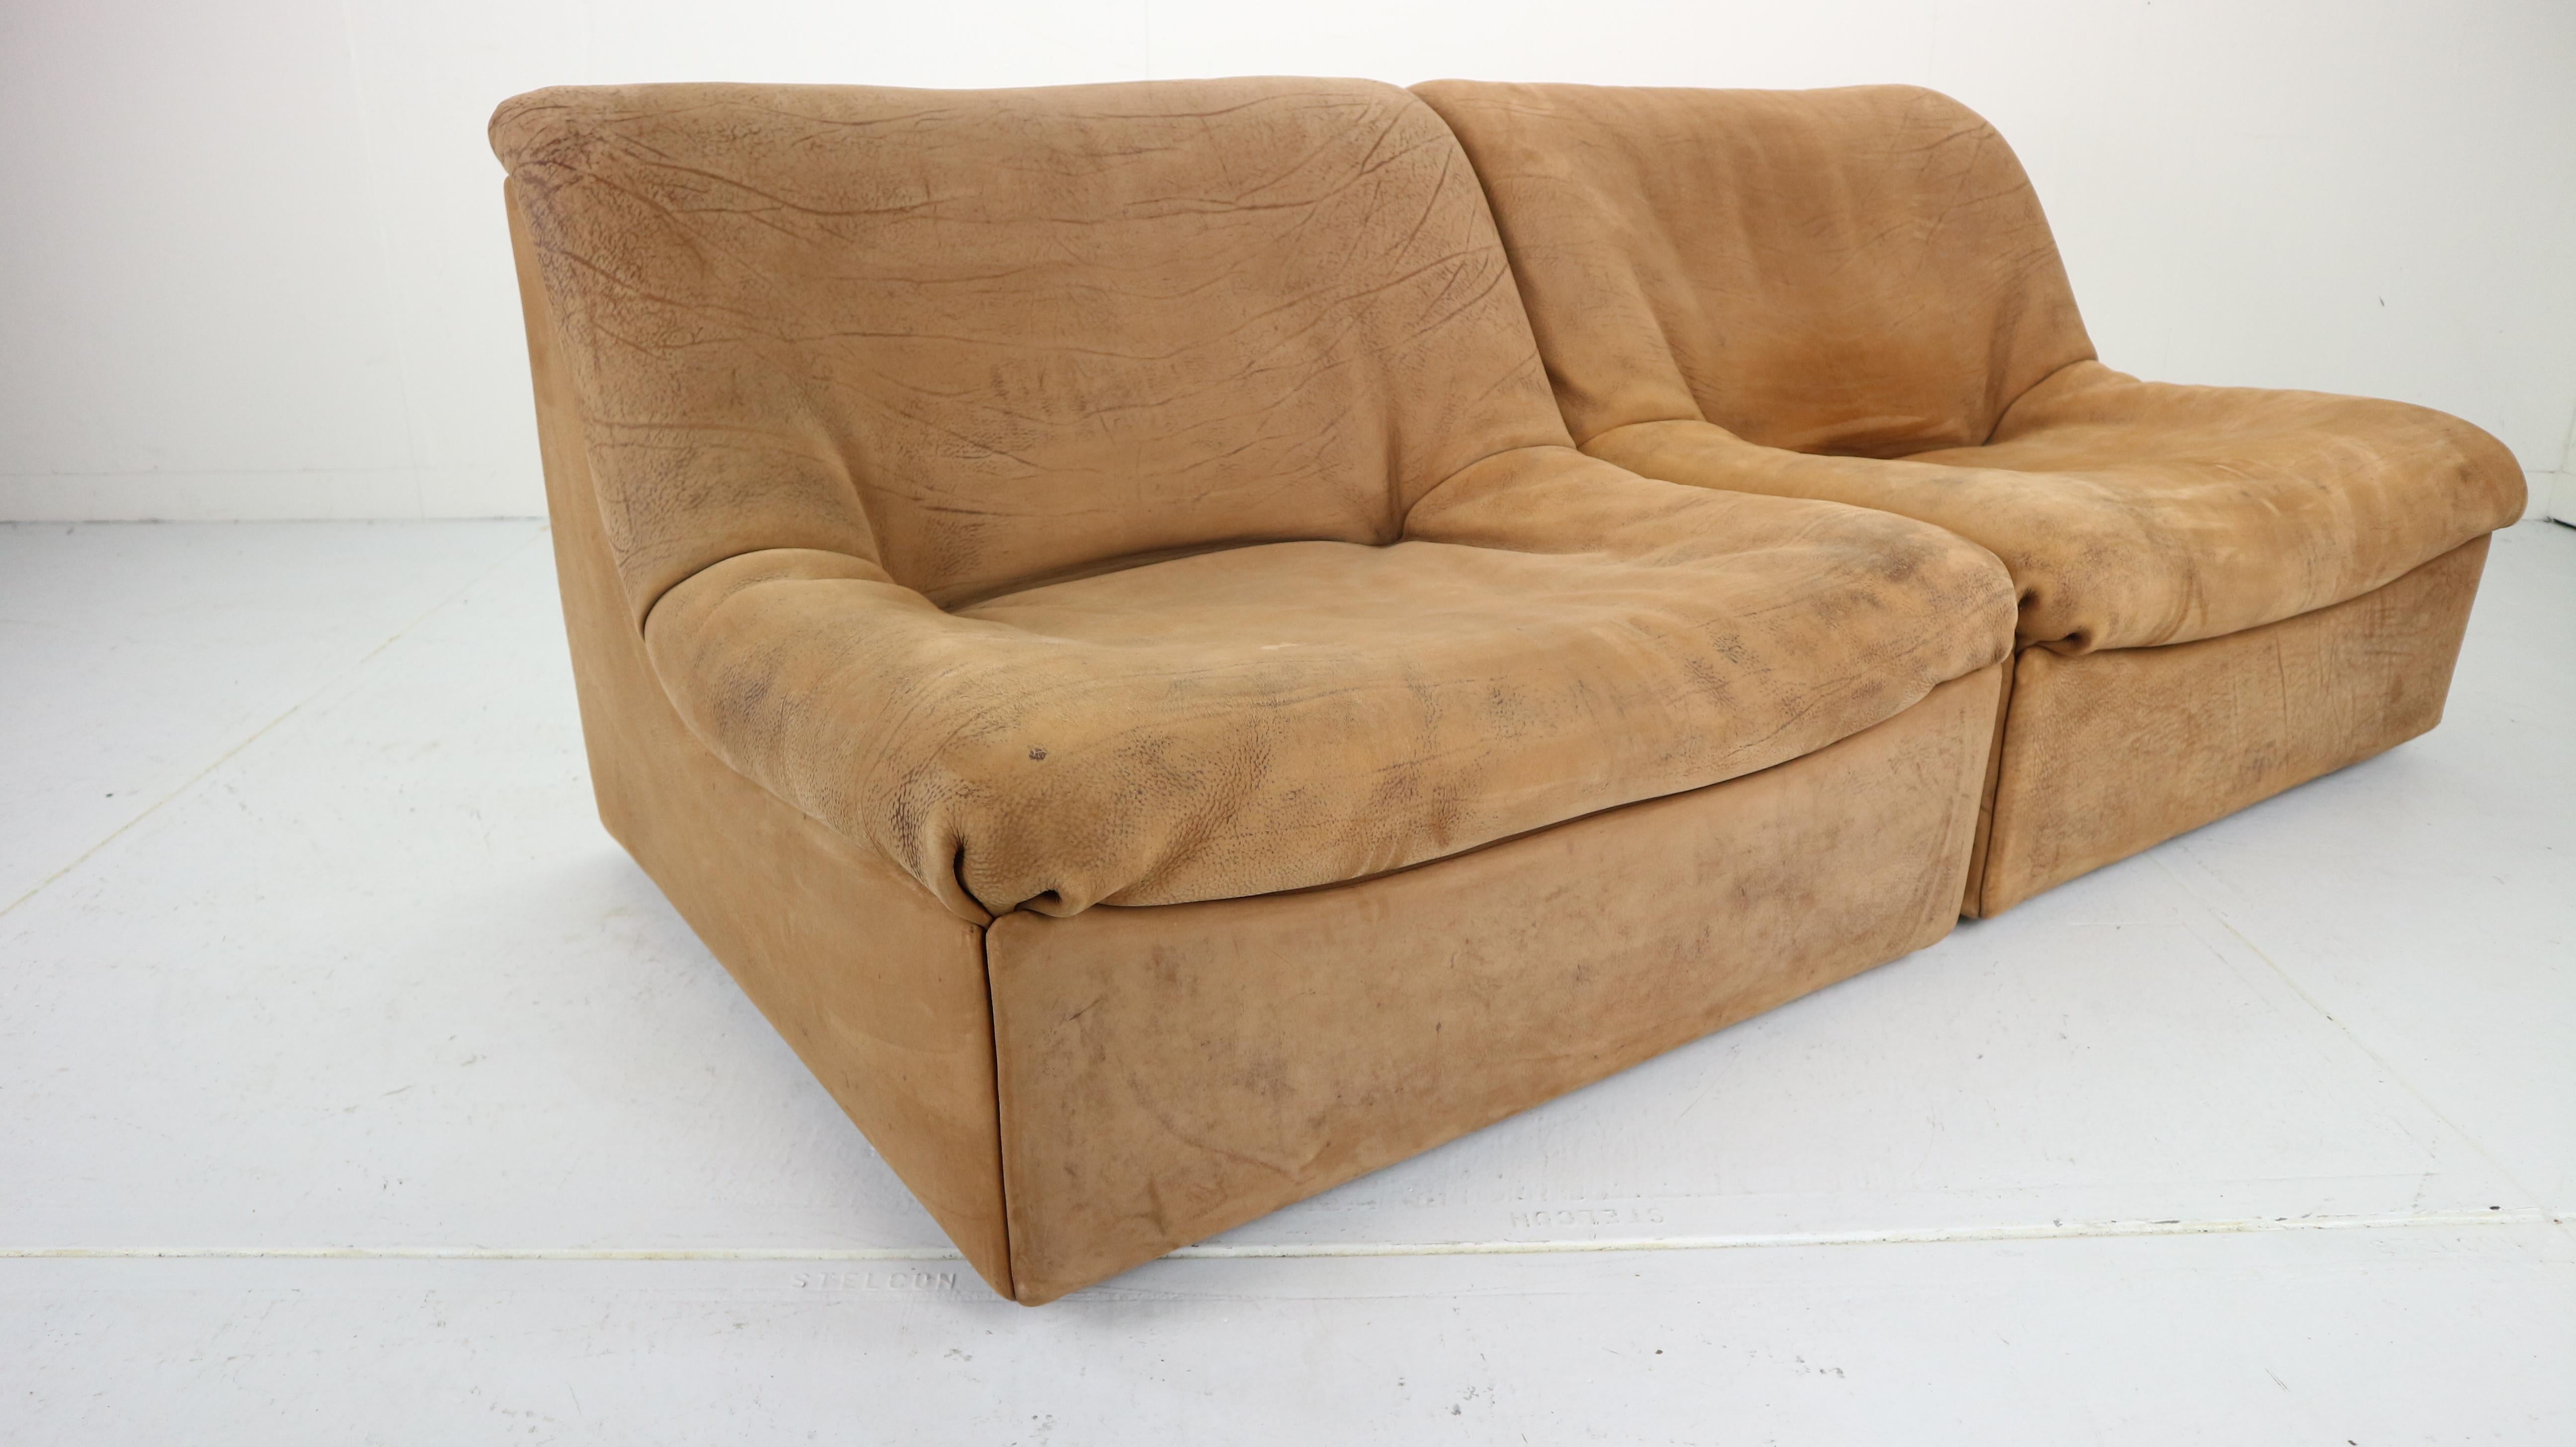 Beautiful two-piece modular sectional sofa in thick buffalo nubuck leather by De Sede, Switzerland, 1970s.
You can make it two single lounge chairs, or two-seat comfortable sofa as pieces are sectional and easy to move it!
Original condition.